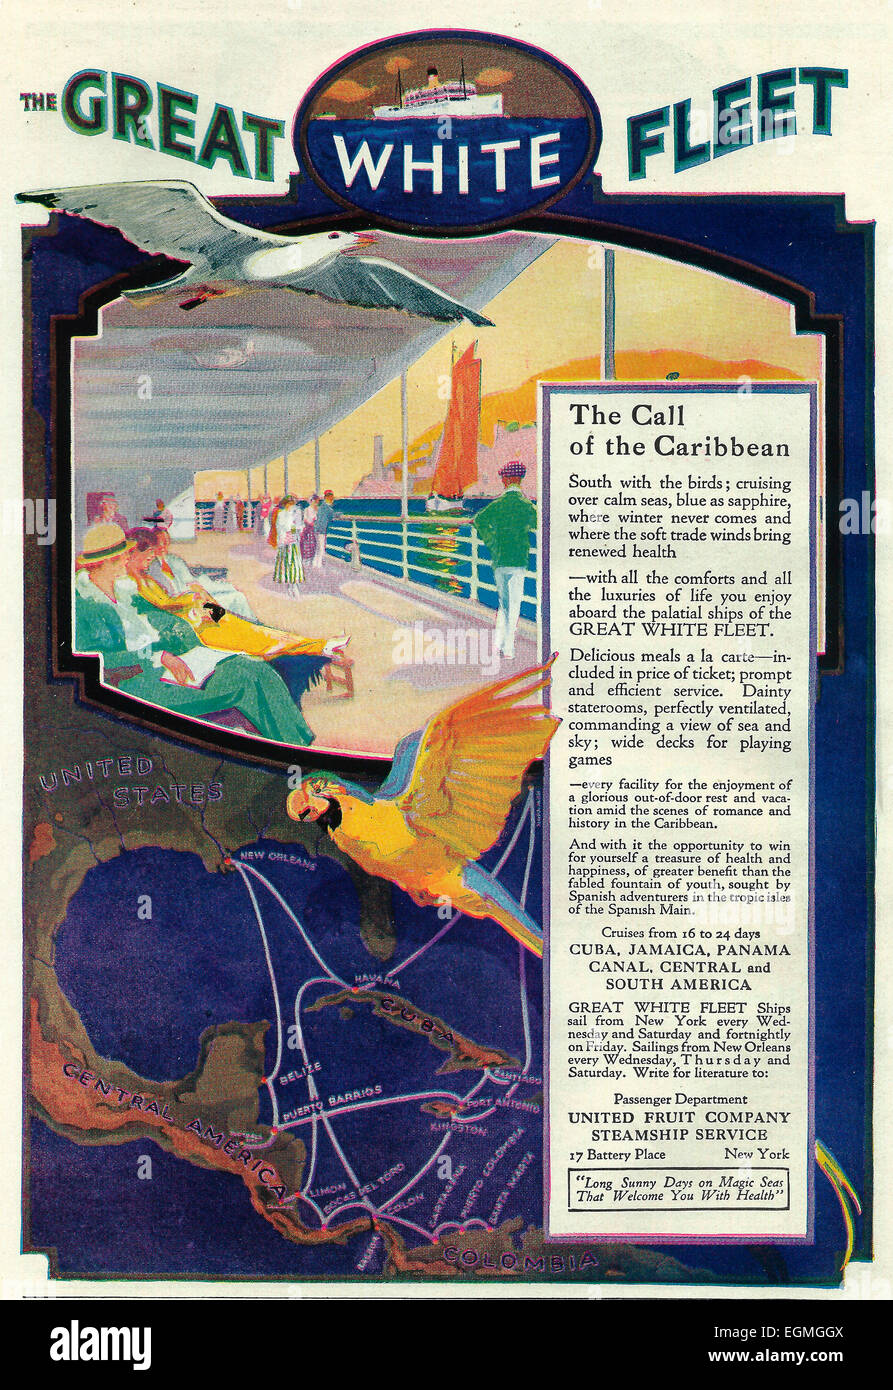 The Great White Fleet - The Call of the Caribbean - United Fruit Company Steamship Service - Cruise Advertisement 1916 Stock Photo